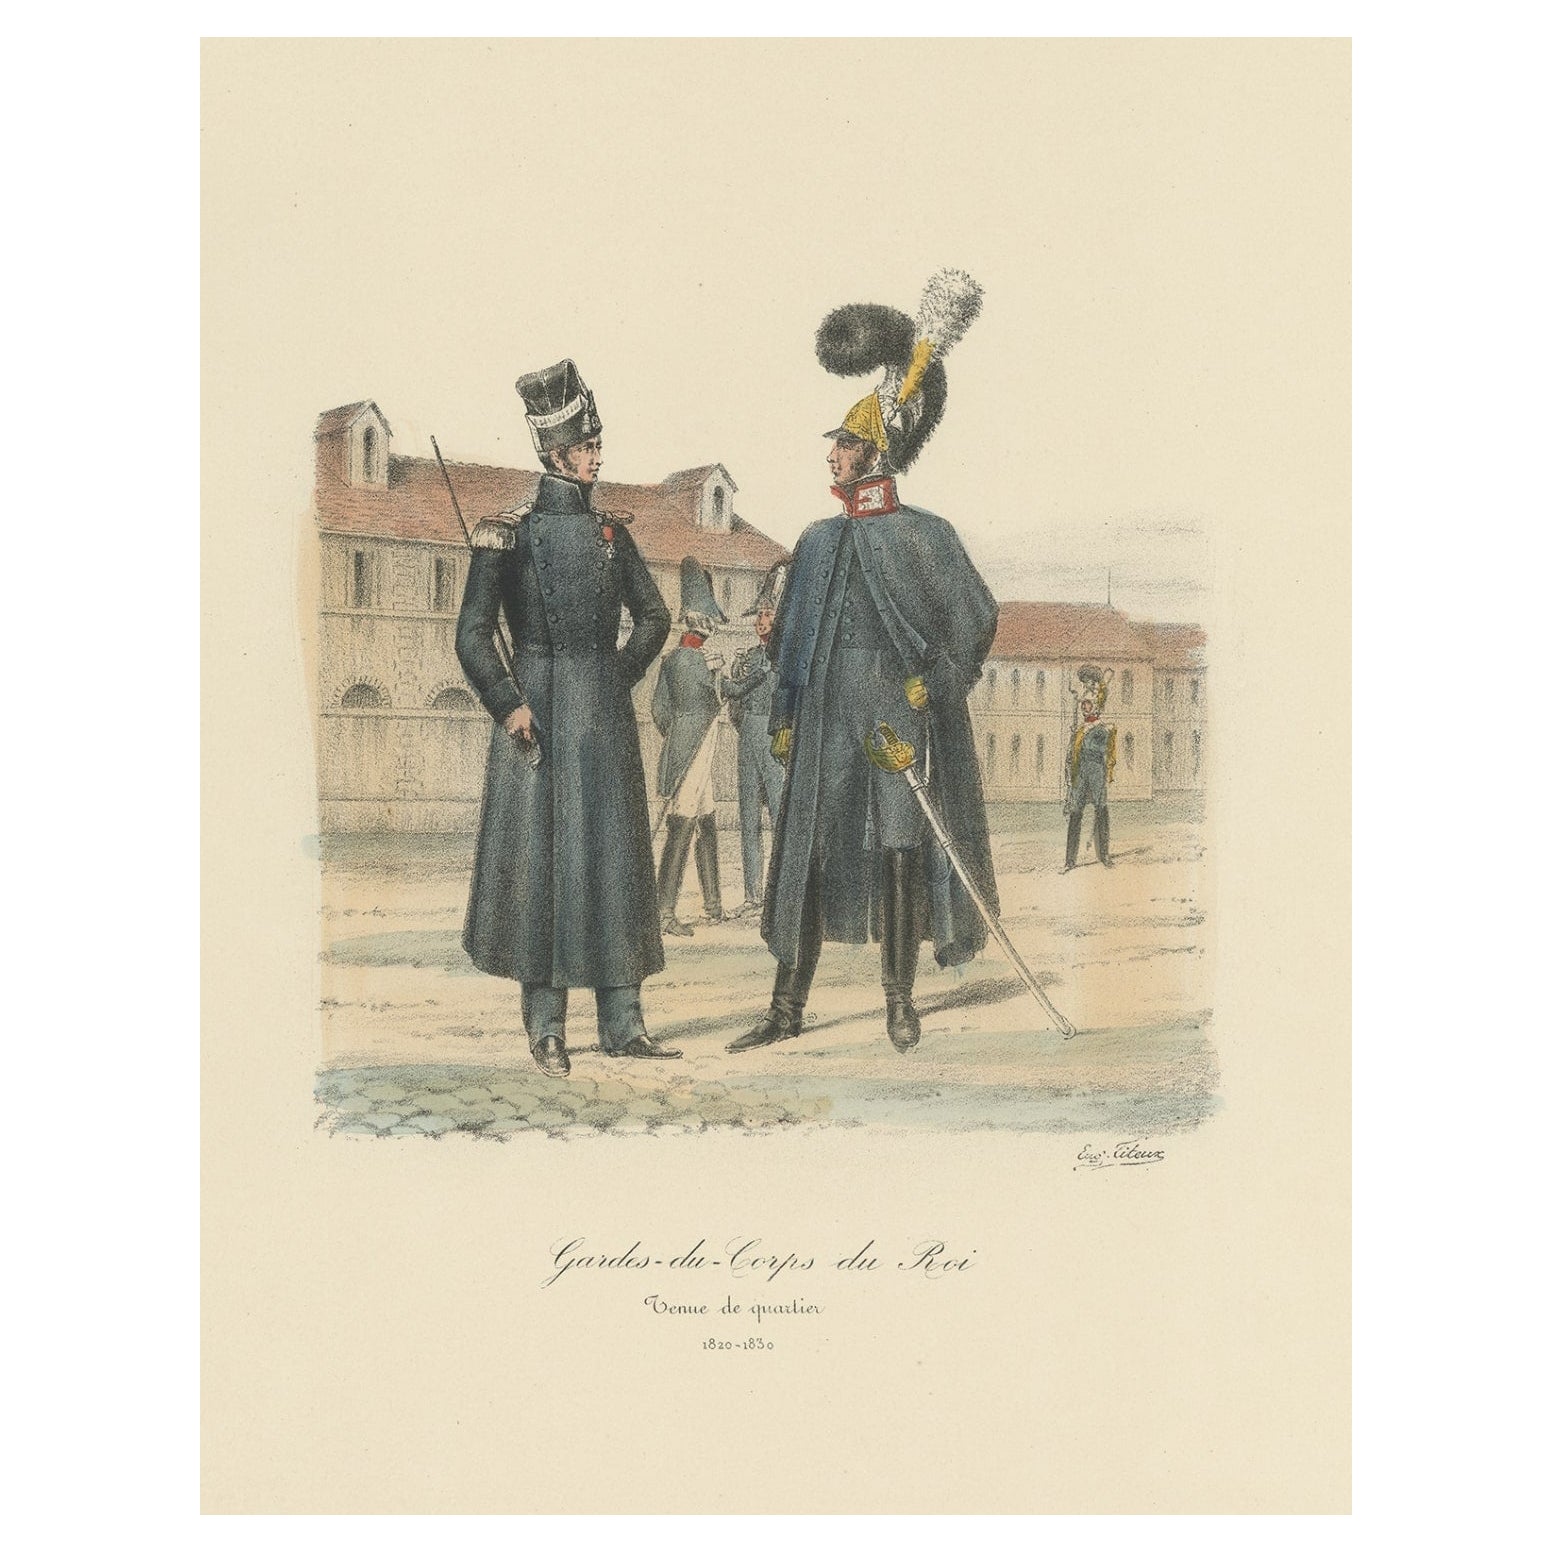 Old Hand-Colored Print of the Guards of the King of France, 1890